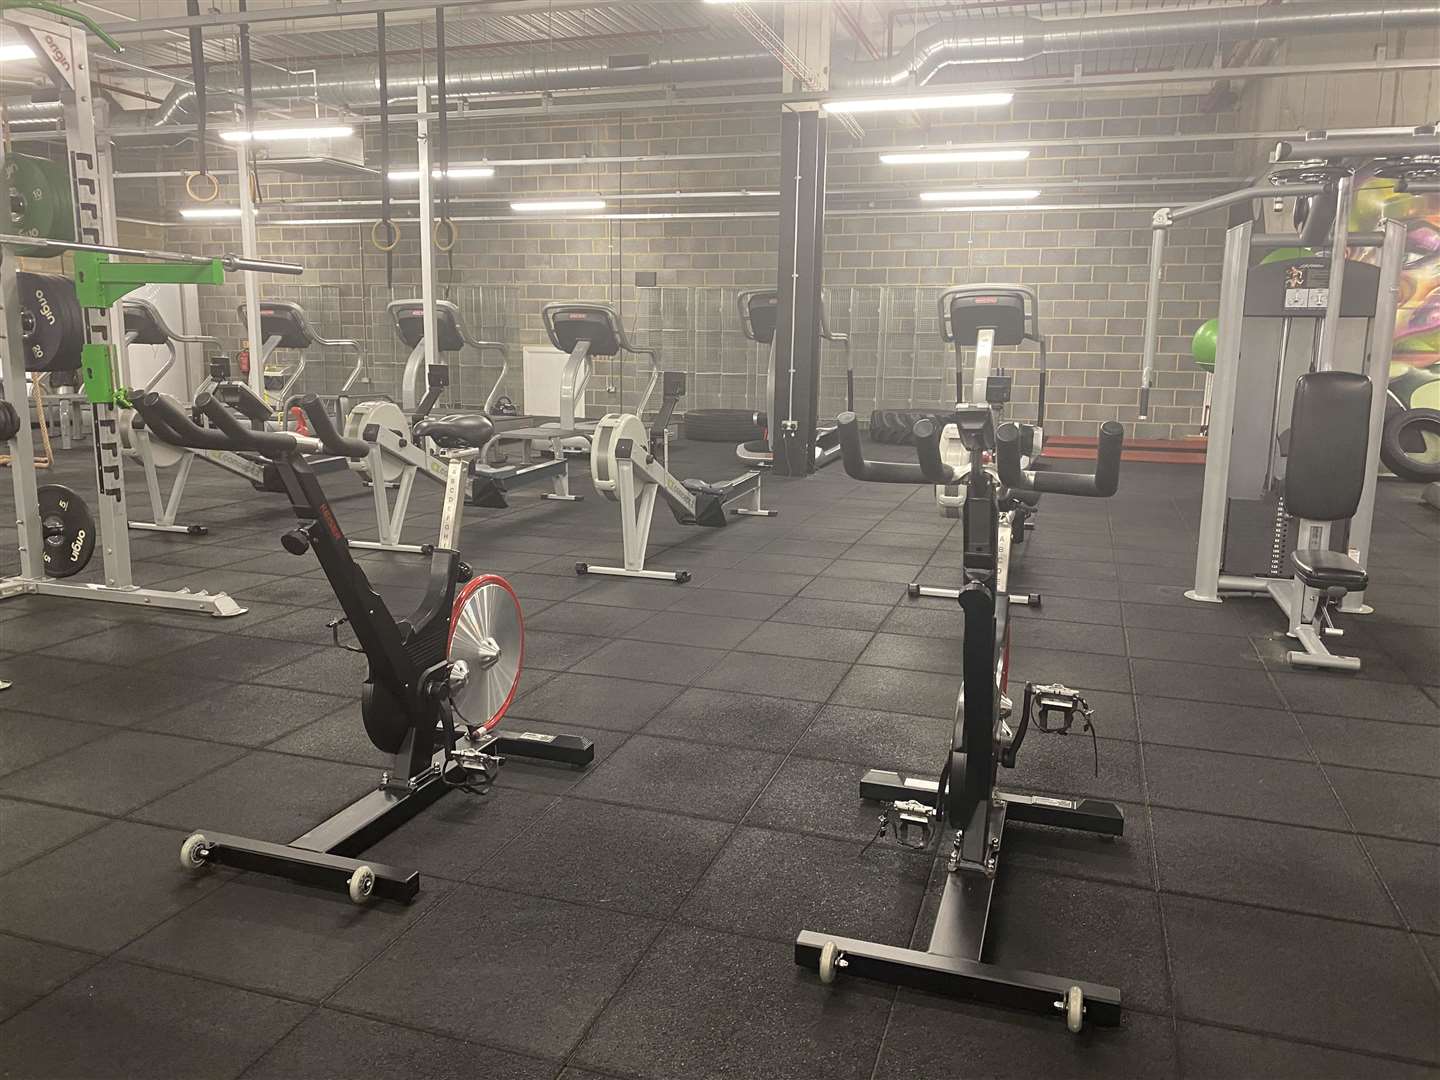 Jay's gym has been redesigned to adhere to social distancing rules.